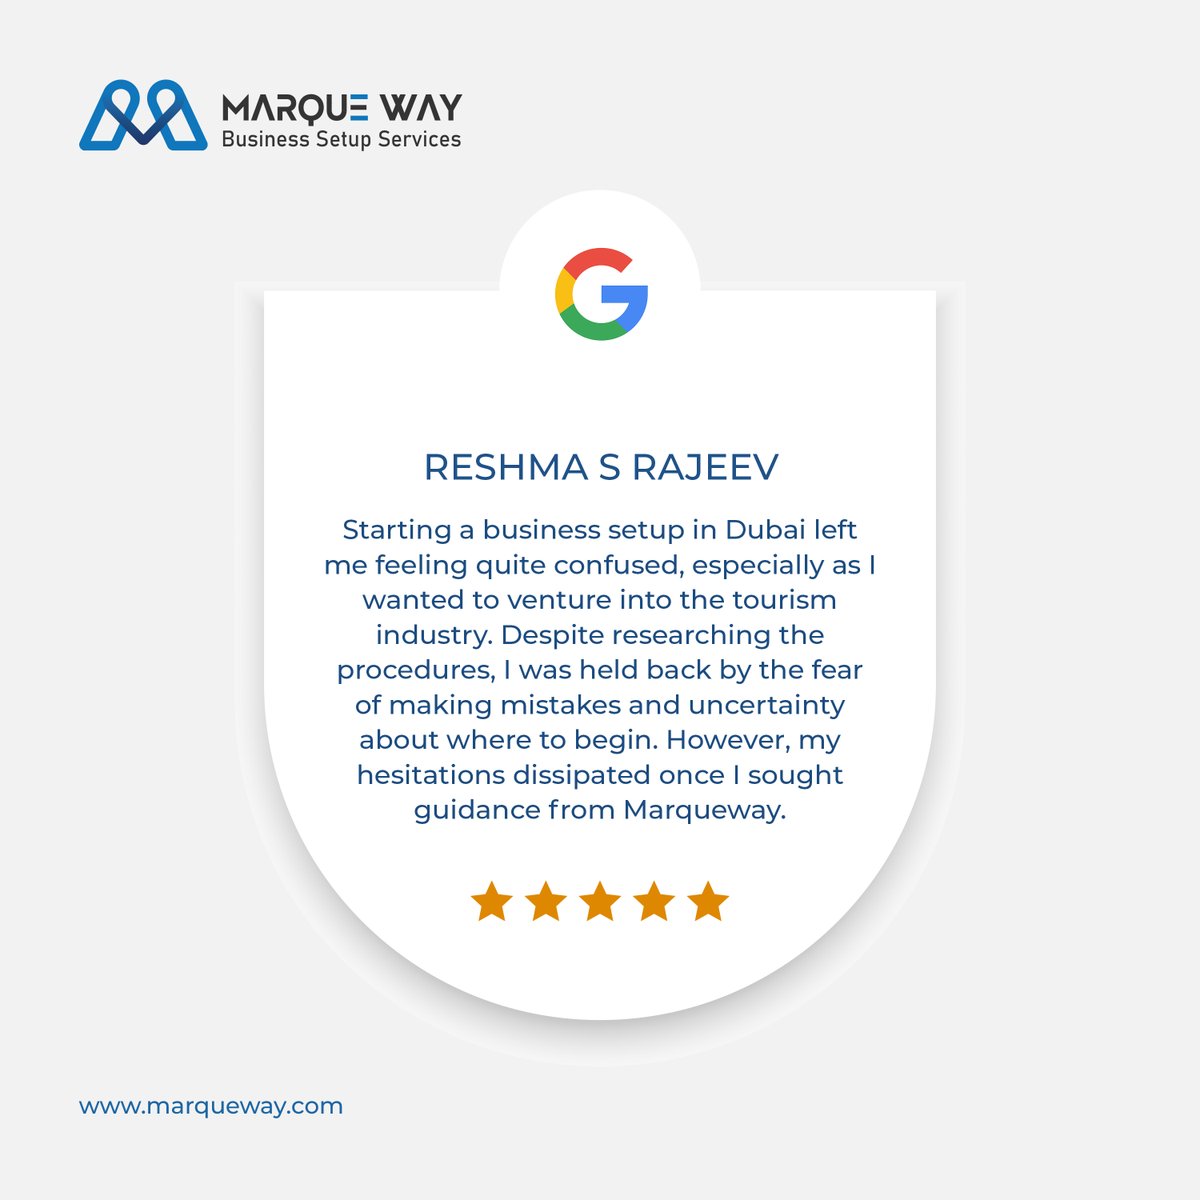 Thank you Reshma for your valuable comments about Marqueway. Our primary objective is the well-being of our customers and we will continue to deliver at a high-level.

#Marqueway #review #customerfeedback #customerservice #happyclients #googlereview #businesssetup #dubai #uae